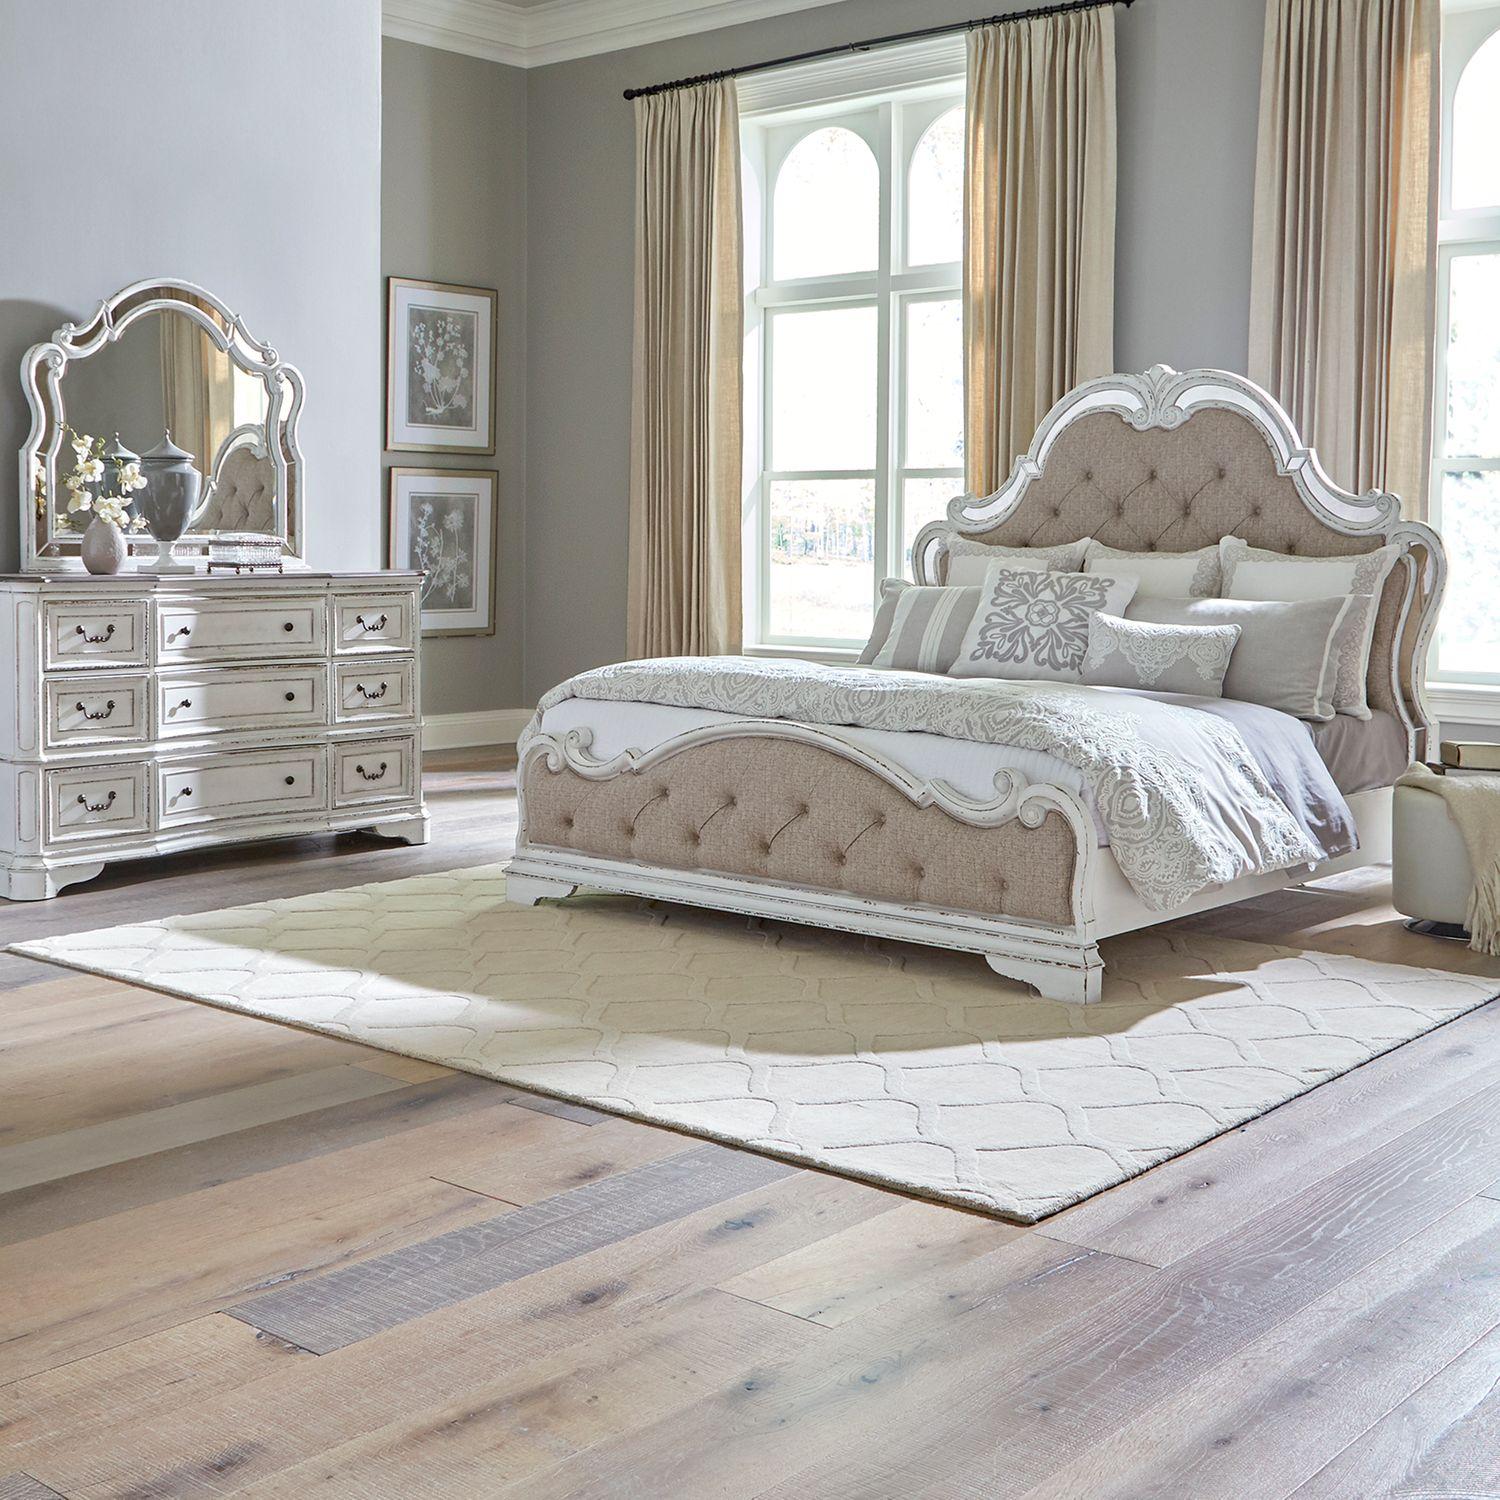 European Traditional Platform Bedroom Set Magnolia Manor  (244-BR) Mirrored Bed Set 244-BR-OQUBDM in White Chenille